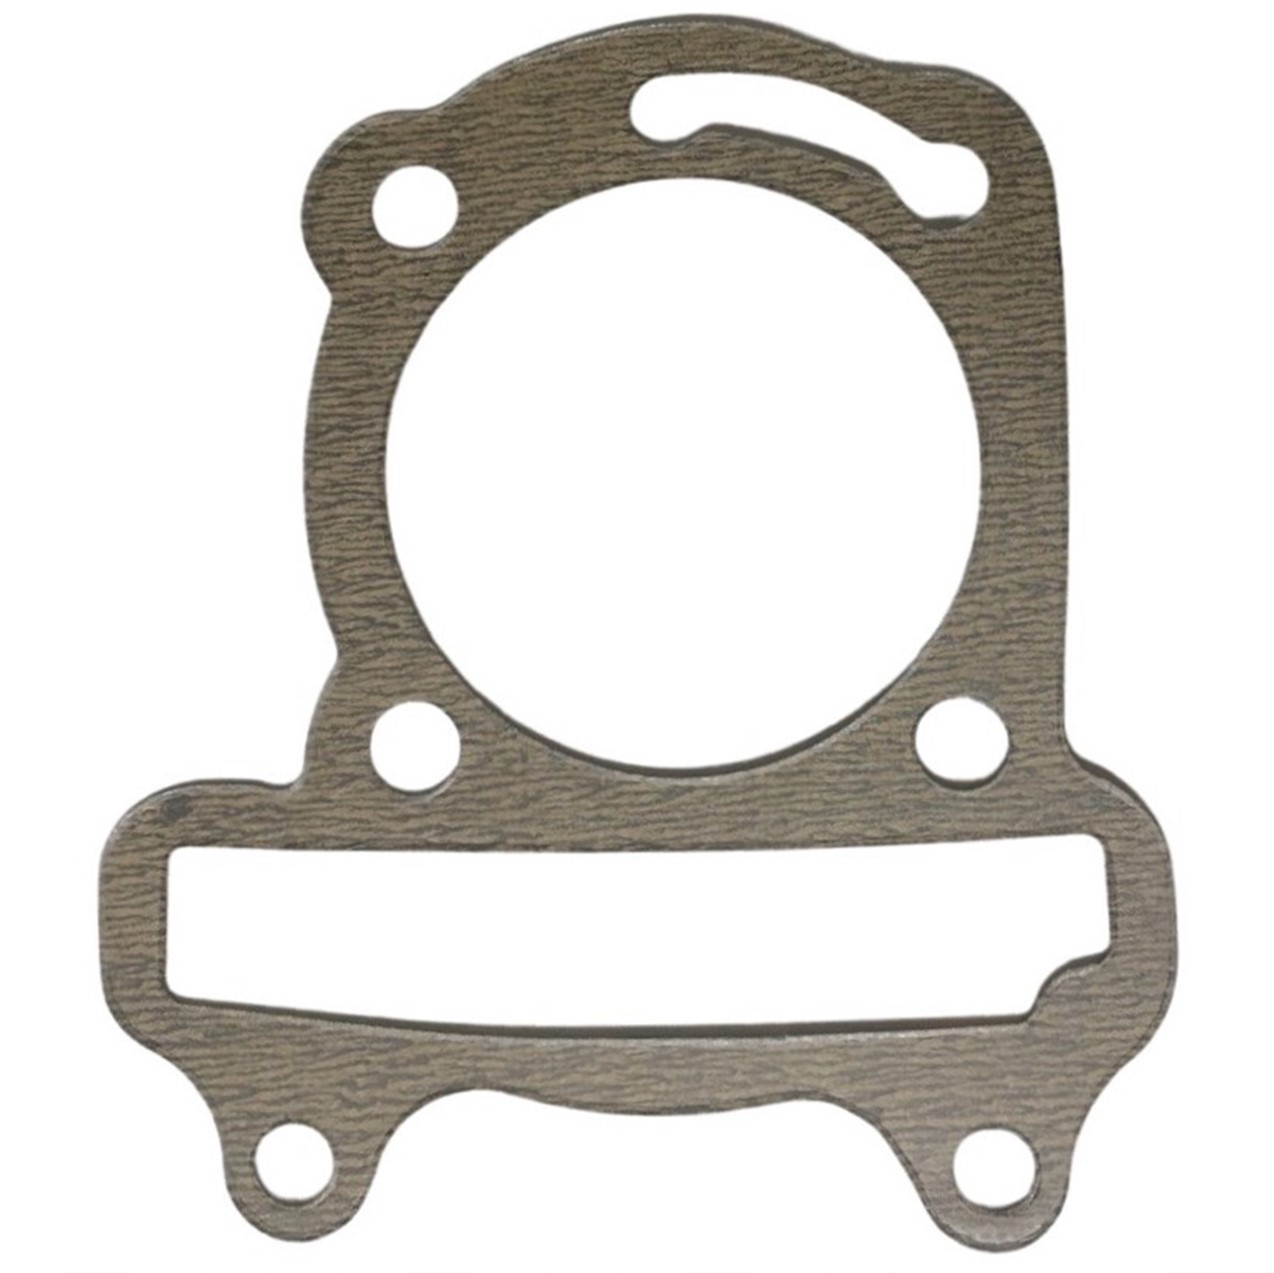 Cylinder Base Gasket Fits GY6-50 to 80cc QMB139 ATVs & Scooters